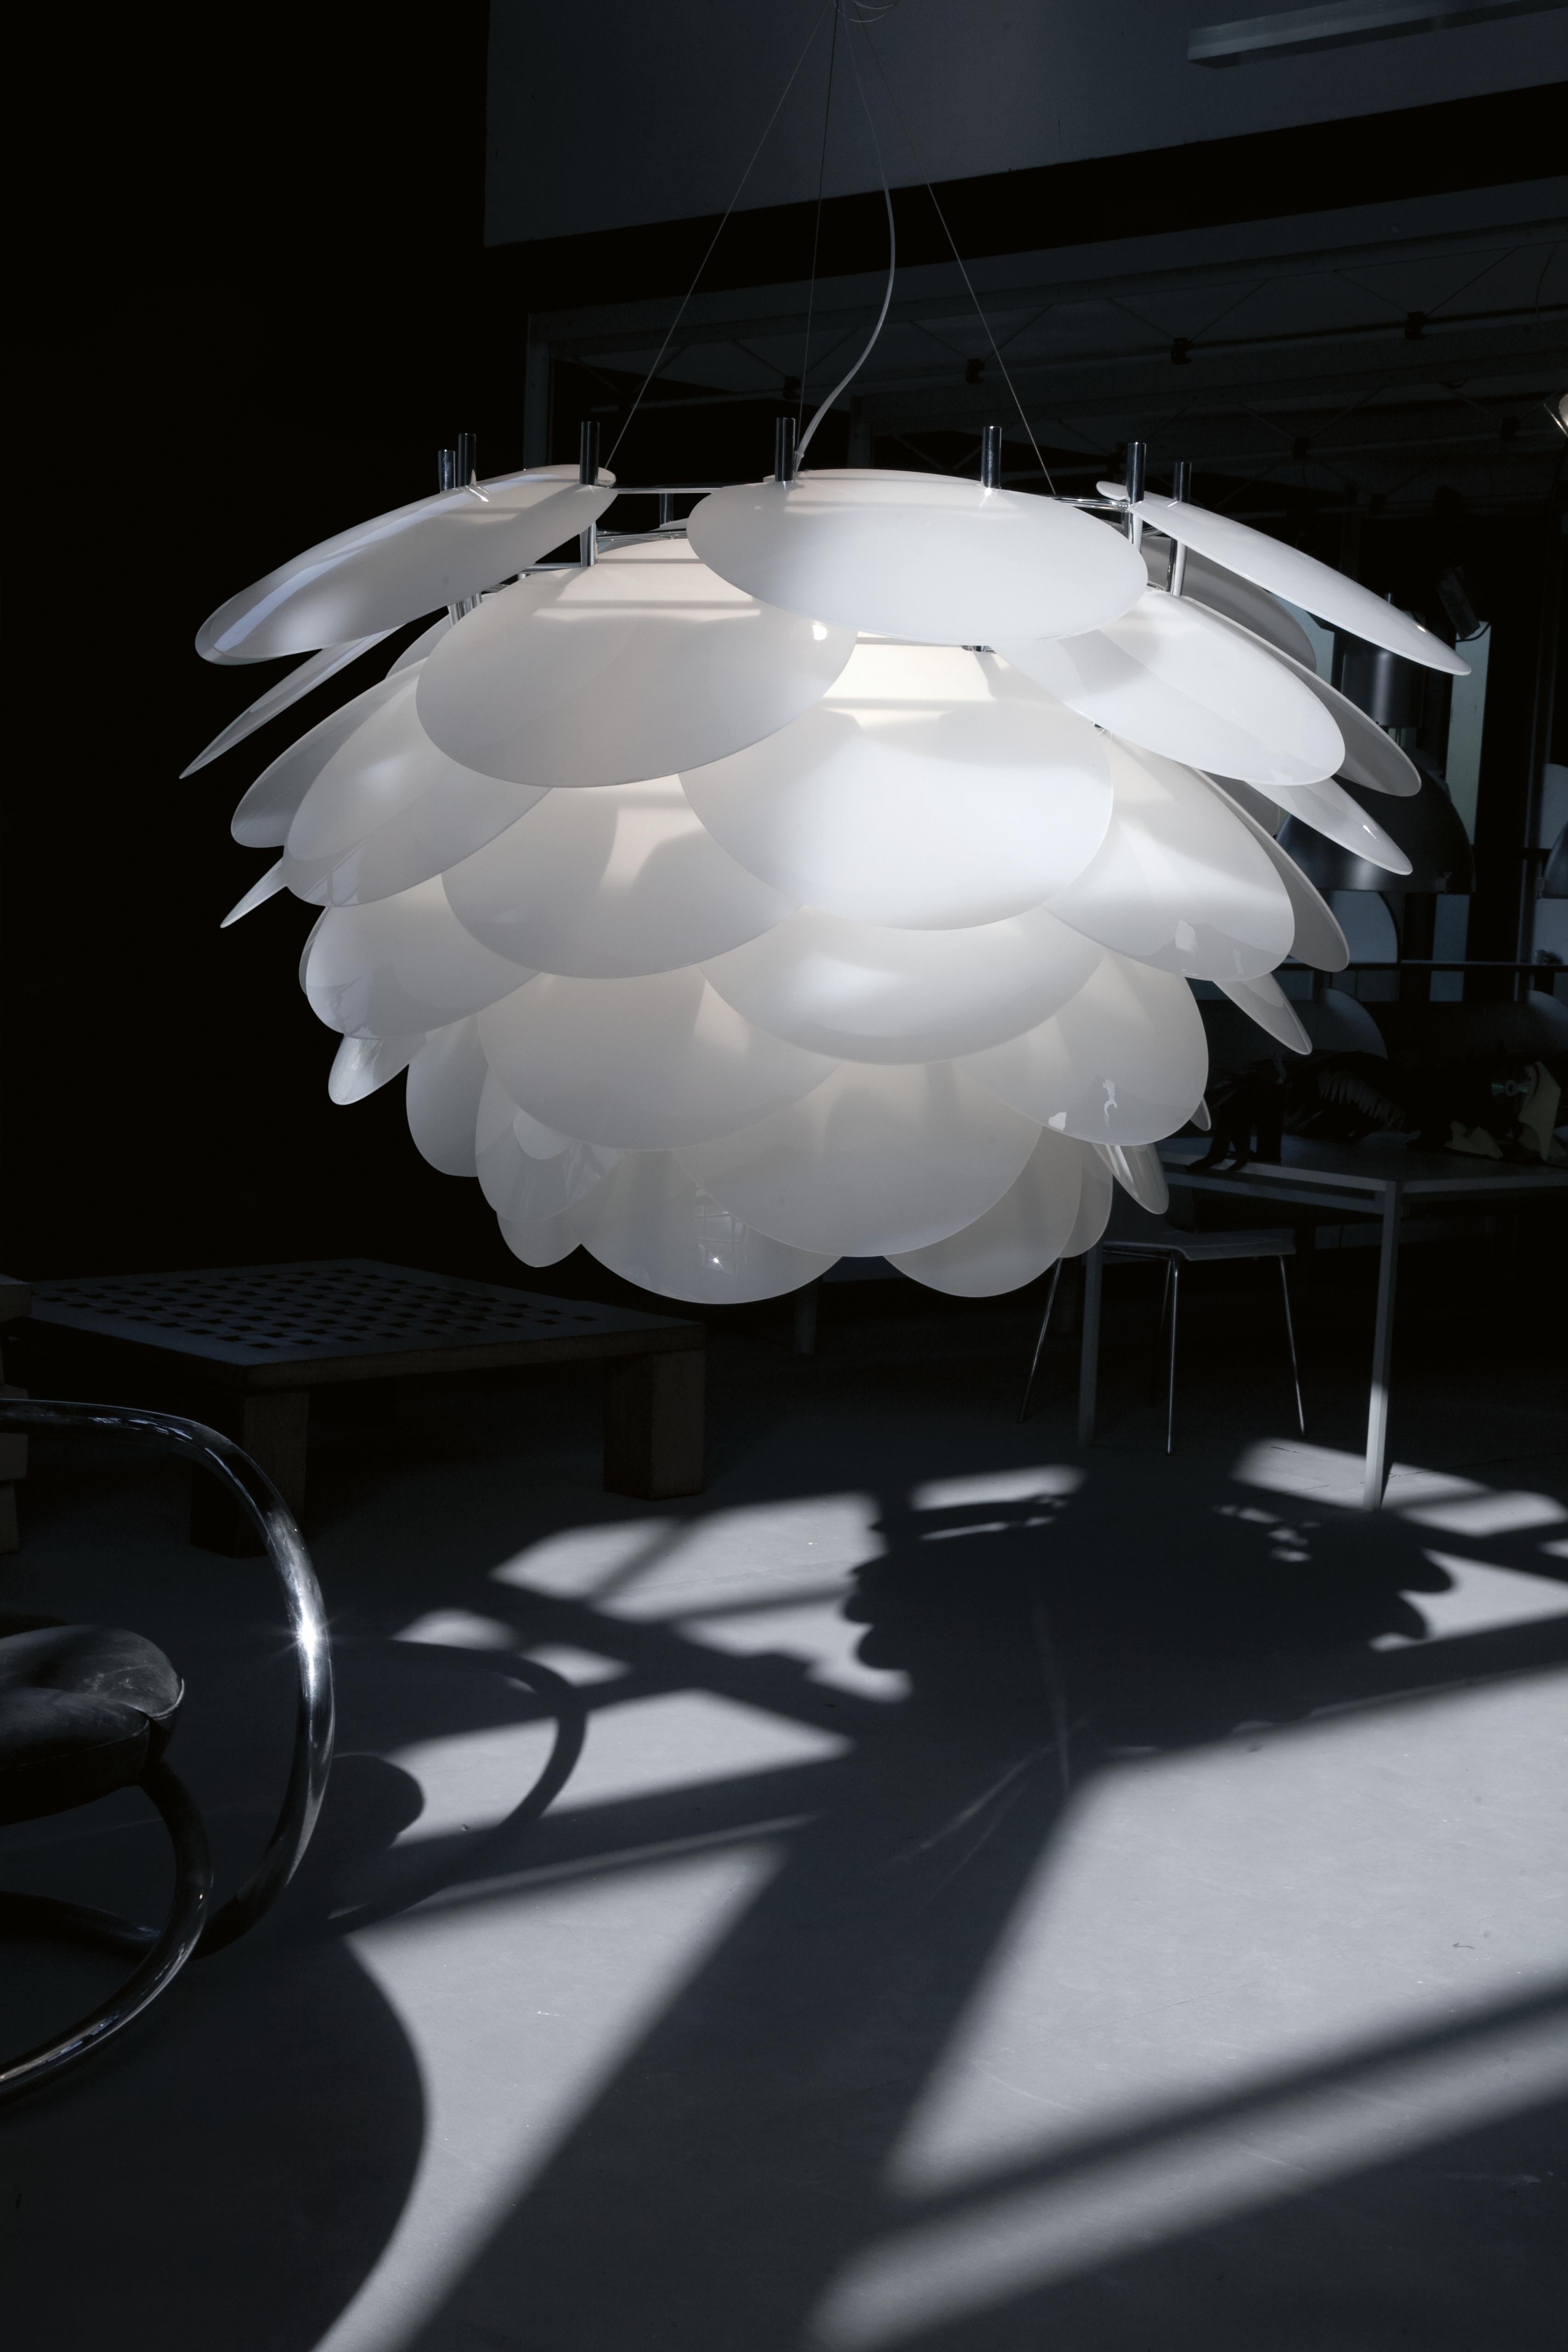 Nuvole Vagabonde pendant light by Elio Martinelli. Suspension lamp providing diffused light. Metal support for hanging, white opal methacrylate diffuser. The lamp is suspended with a chrome support. Complete with power supply in the ceiling box.